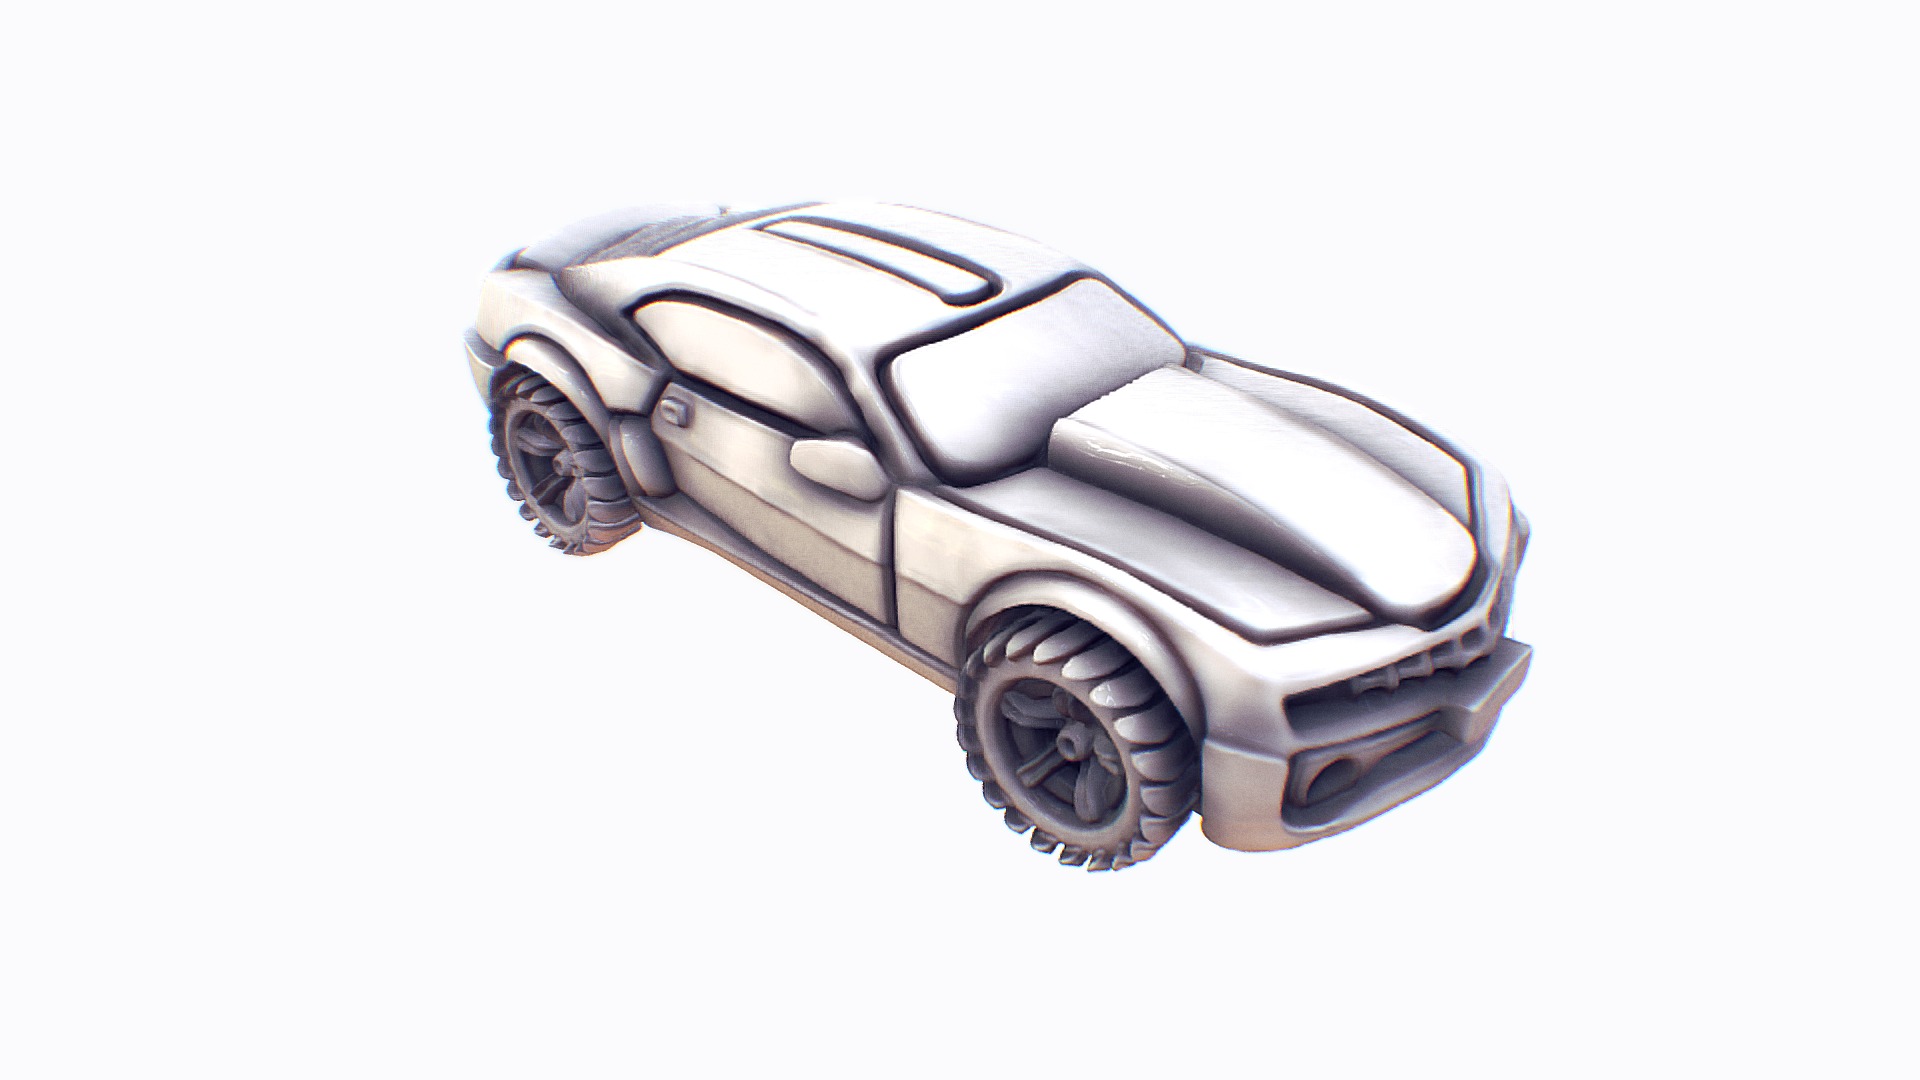 3D model Chevrolet Camaro - This is a 3D model of the Chevrolet Camaro. The 3D model is about a silver and black car.